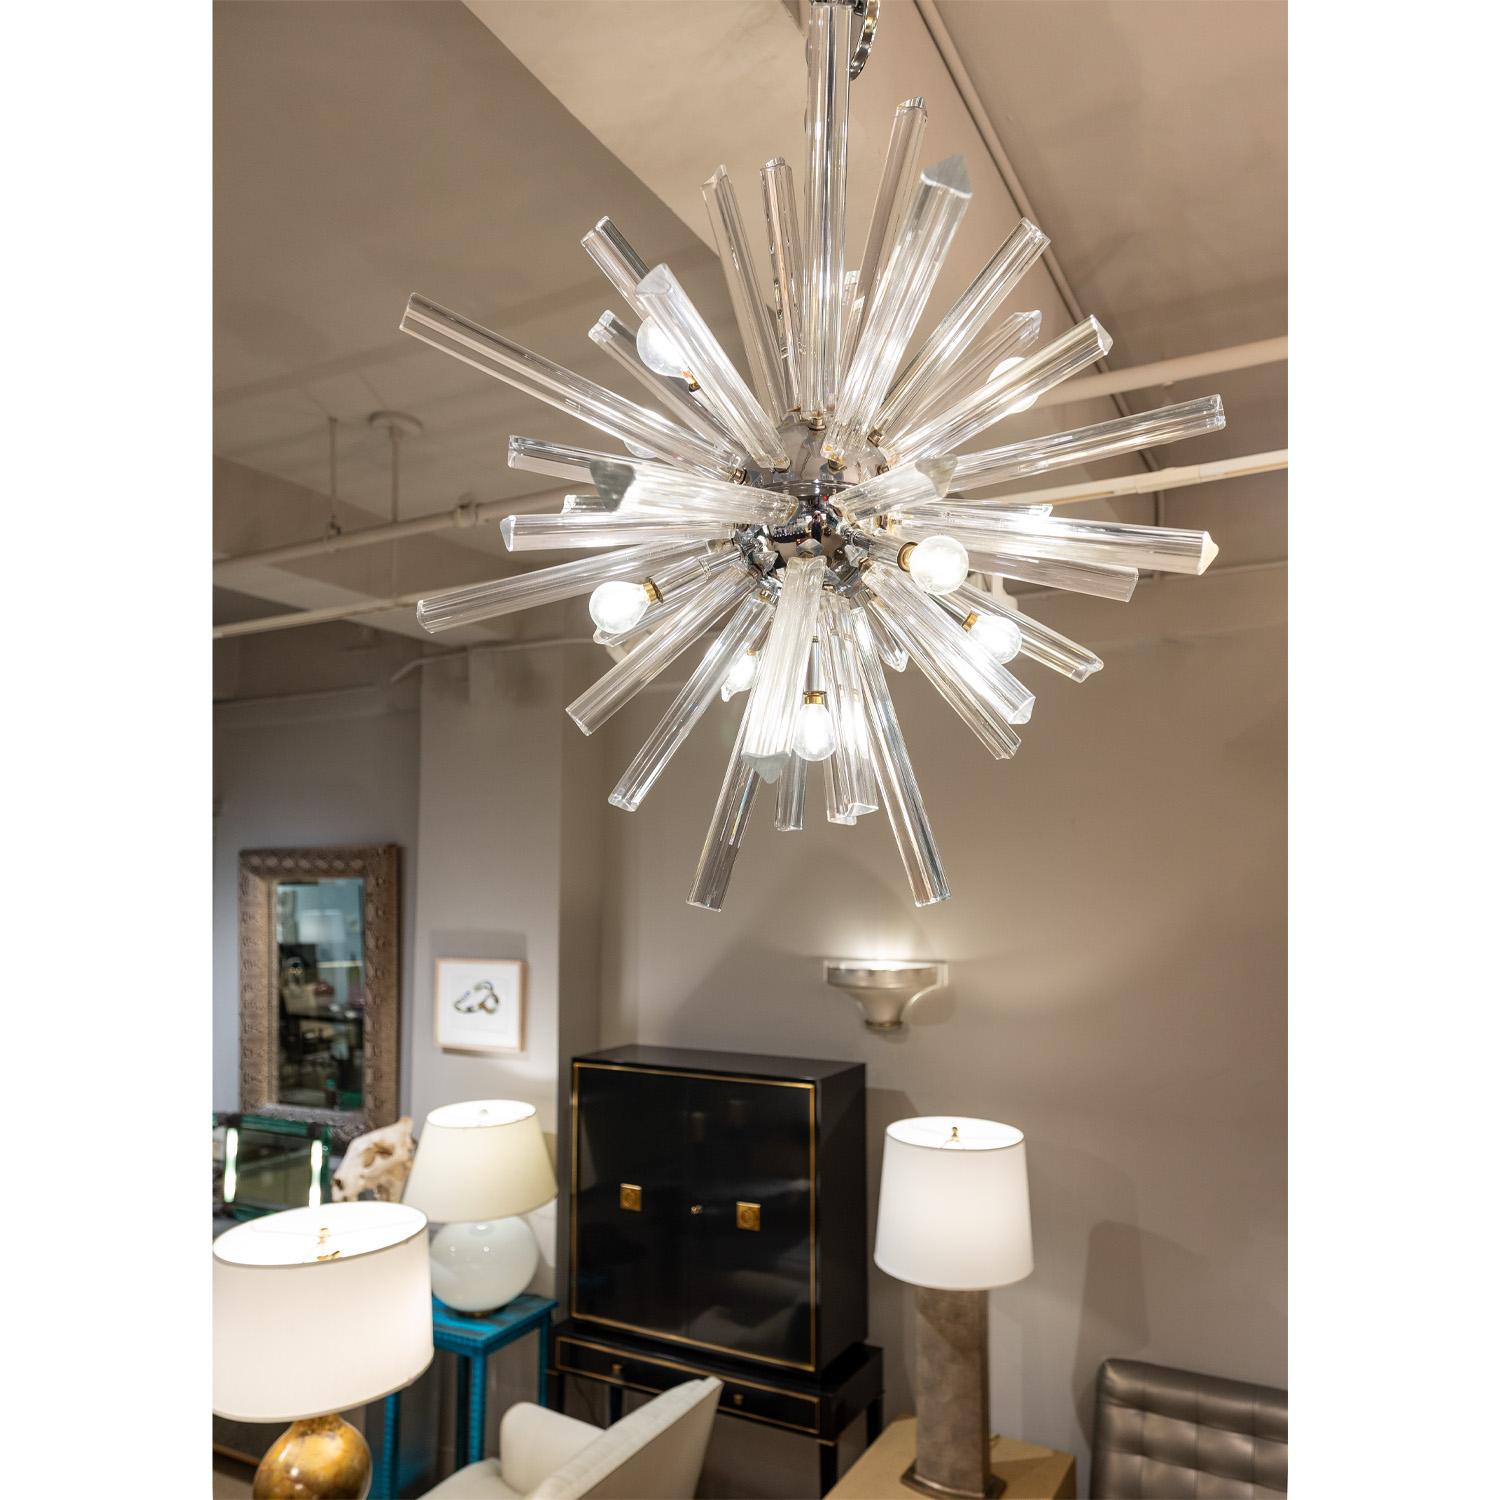 Late 20th Century Sputnik Style Venini Chandelier in Chrome with Glass Rods, 1970s For Sale